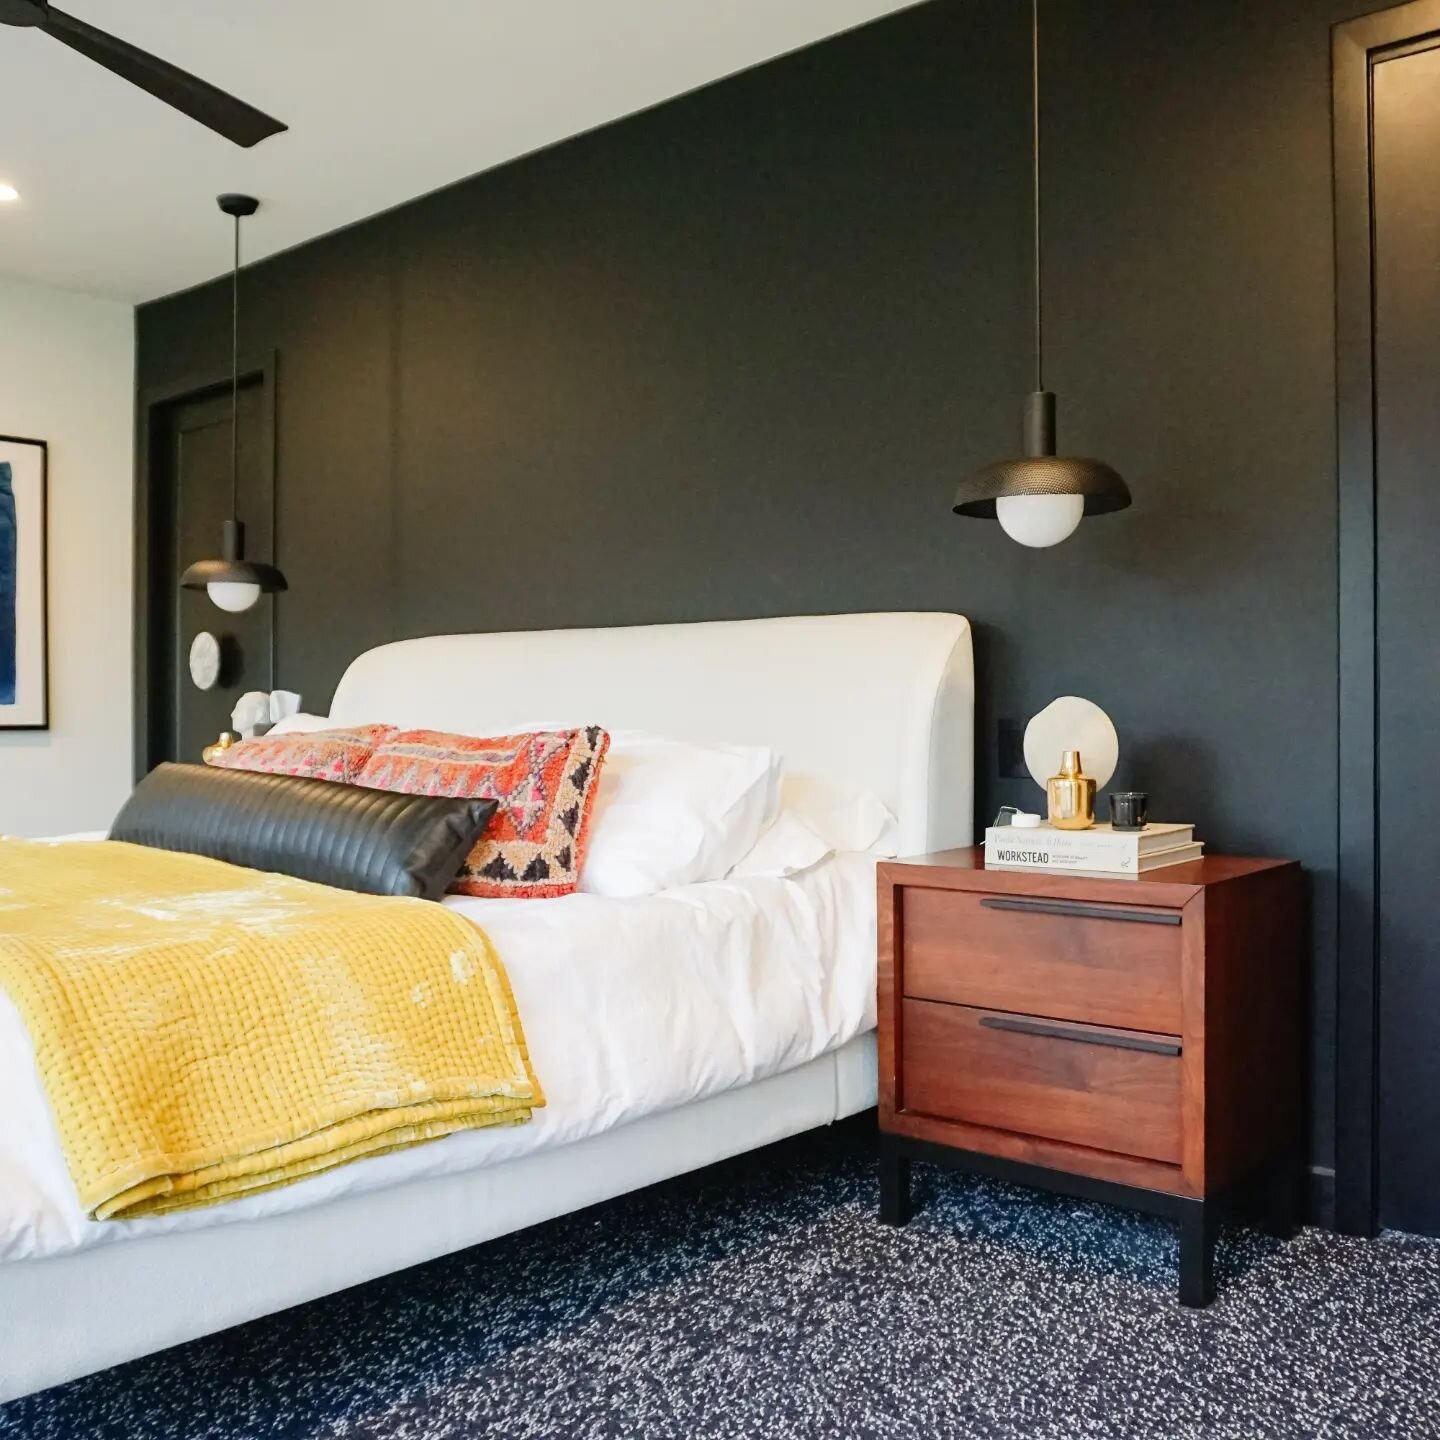 This primary suite in Prairie Village is stunning. We worked to execute an awesome design by @kalibuchananinteriordesign - all the details are so perfect in their simplicity. 

Can you spot the common theme throughout?

We love all the custom hardwar